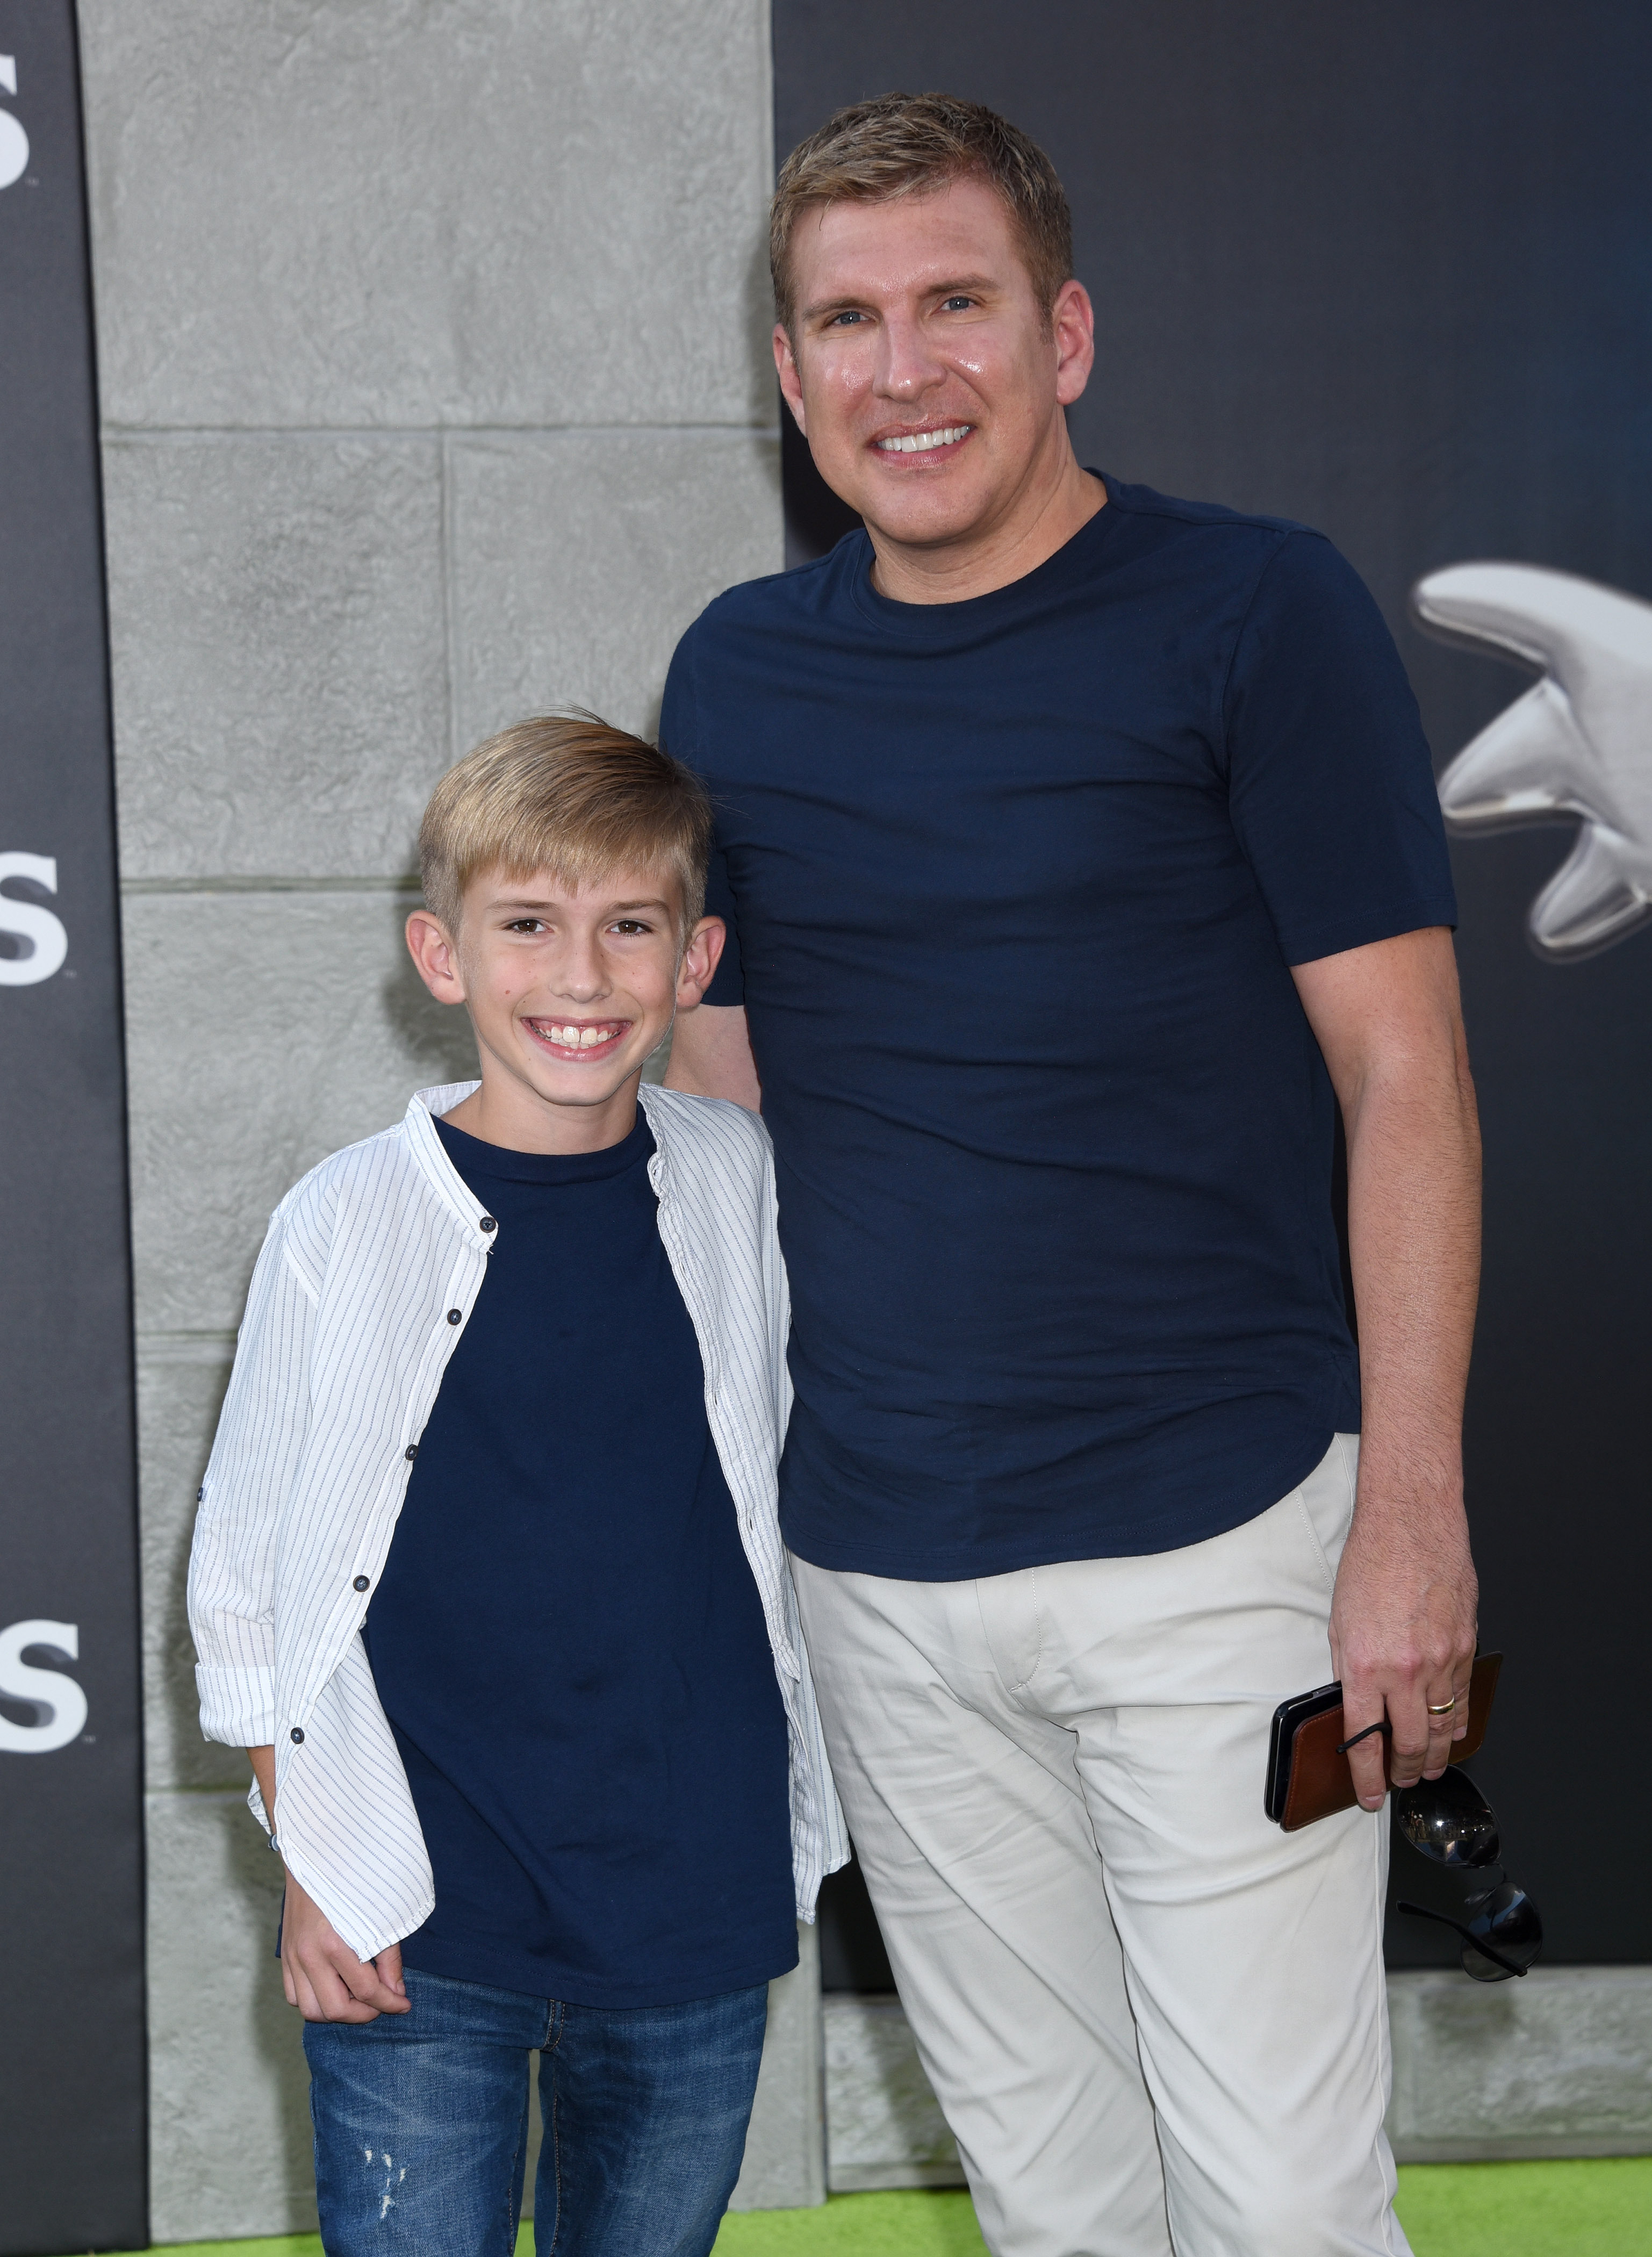 Todd Chrisley and son Grayson attend the premiere of "Ghostbuster" in Hollywood, California on July 9, 2016 | Photo: Getty Images